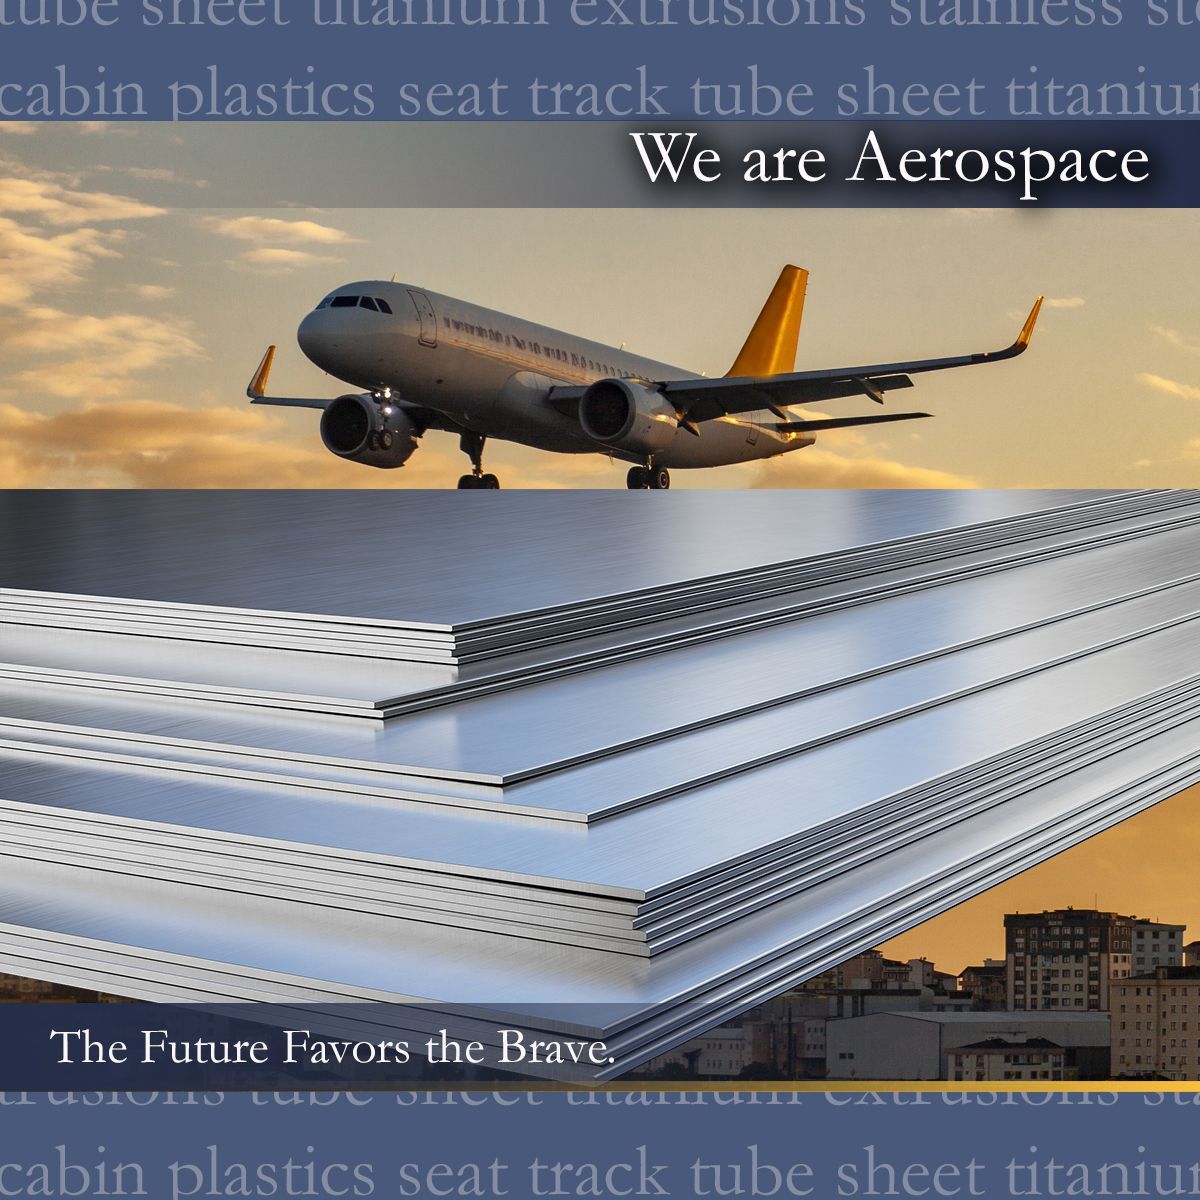 Extrusions, aircraft, aerospace, metal supplier, metals Commercial airplane ascending at dusk over a montage of aerospace-grade materials, including titanium alloy 6AL-4V, supplied by Future Metals.